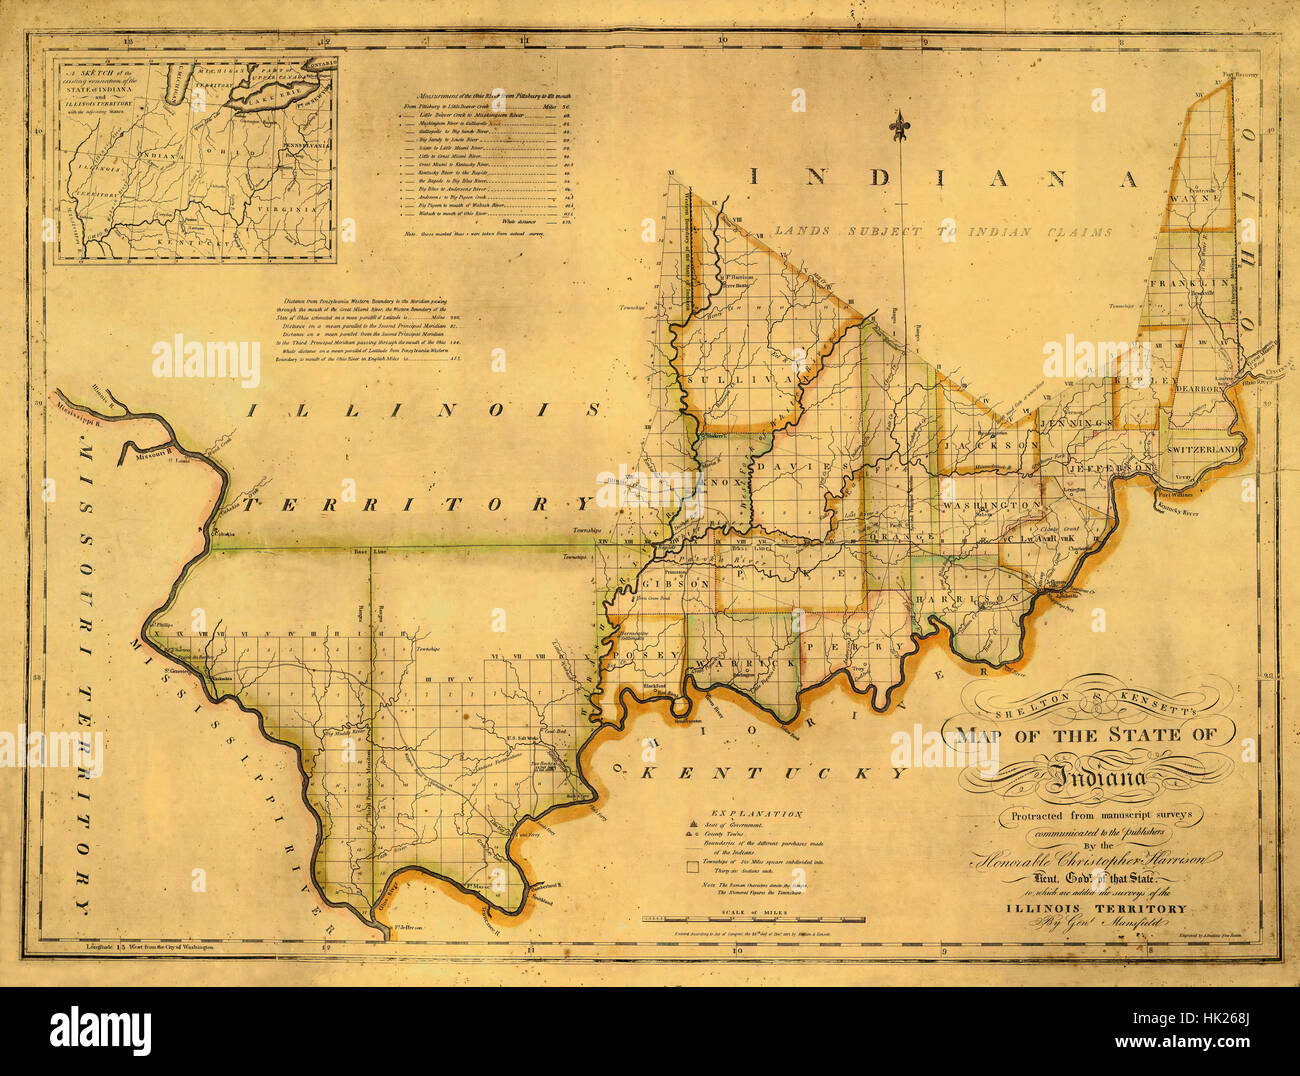 Map of Indiana 1817 Stock Photo